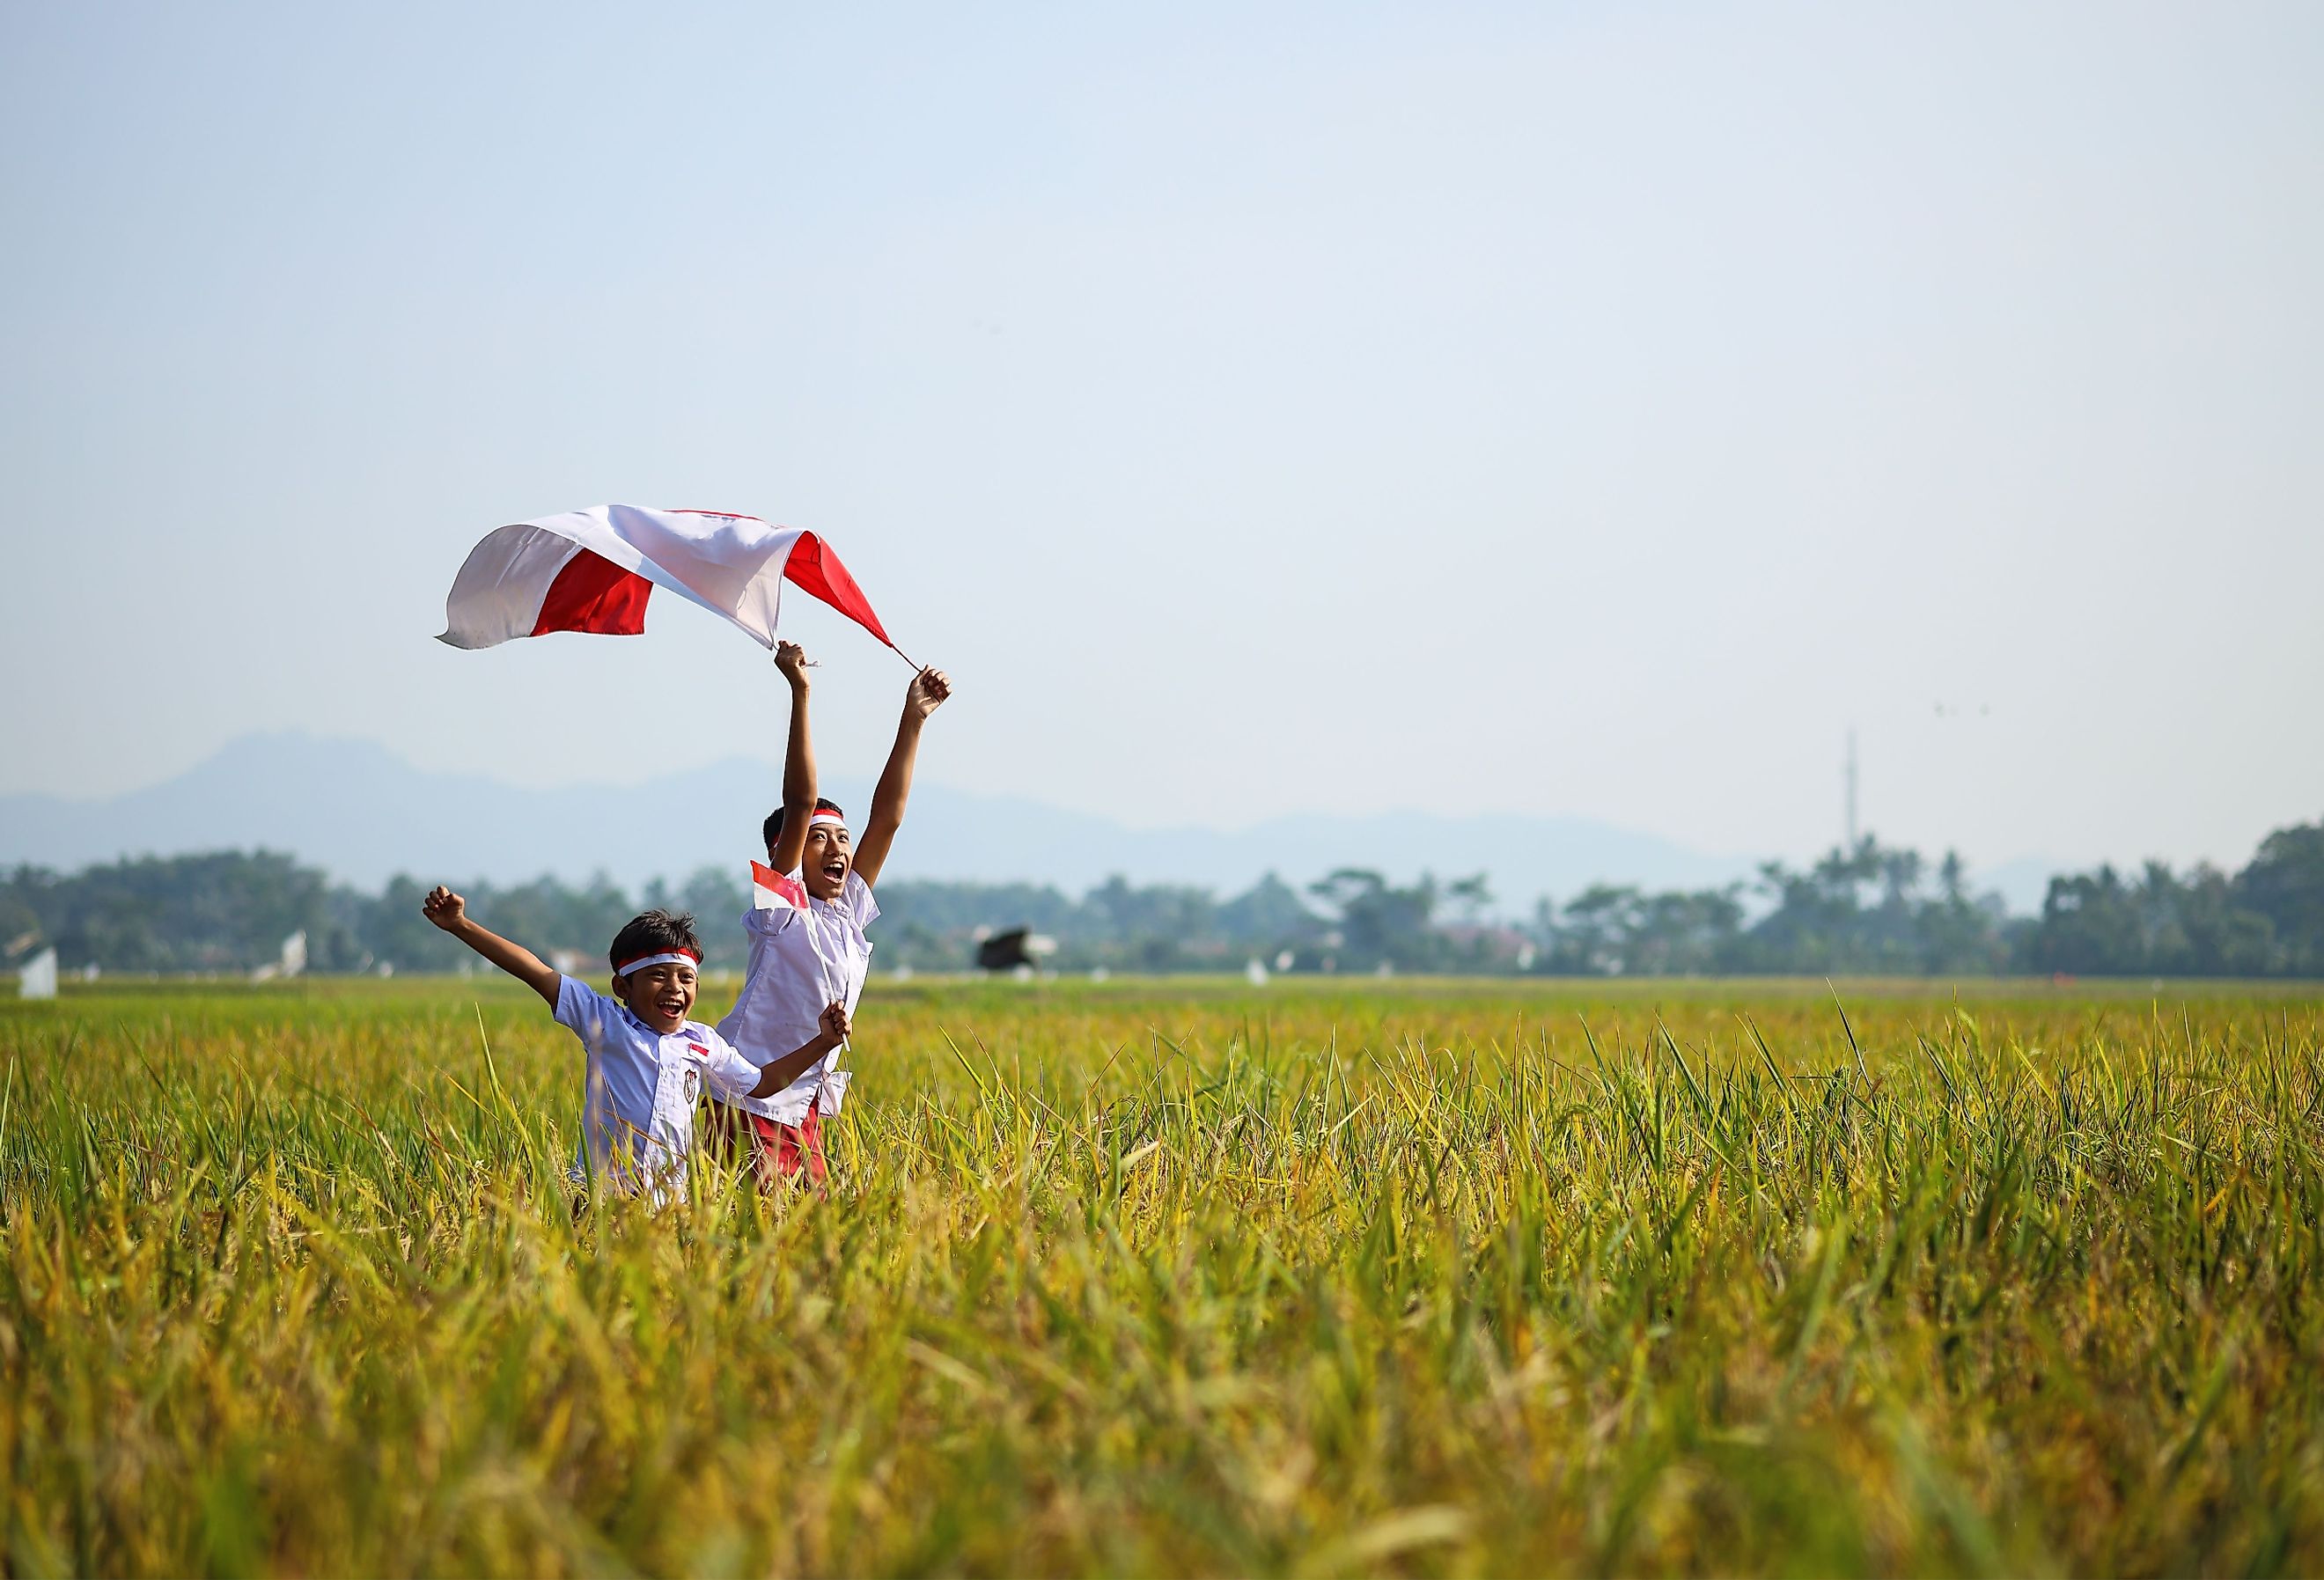 Indonesian school students wearing uniform are raising their hands while holding red white flag in the midst of the rice field. Image credit Gatot Adri via Shutterstock